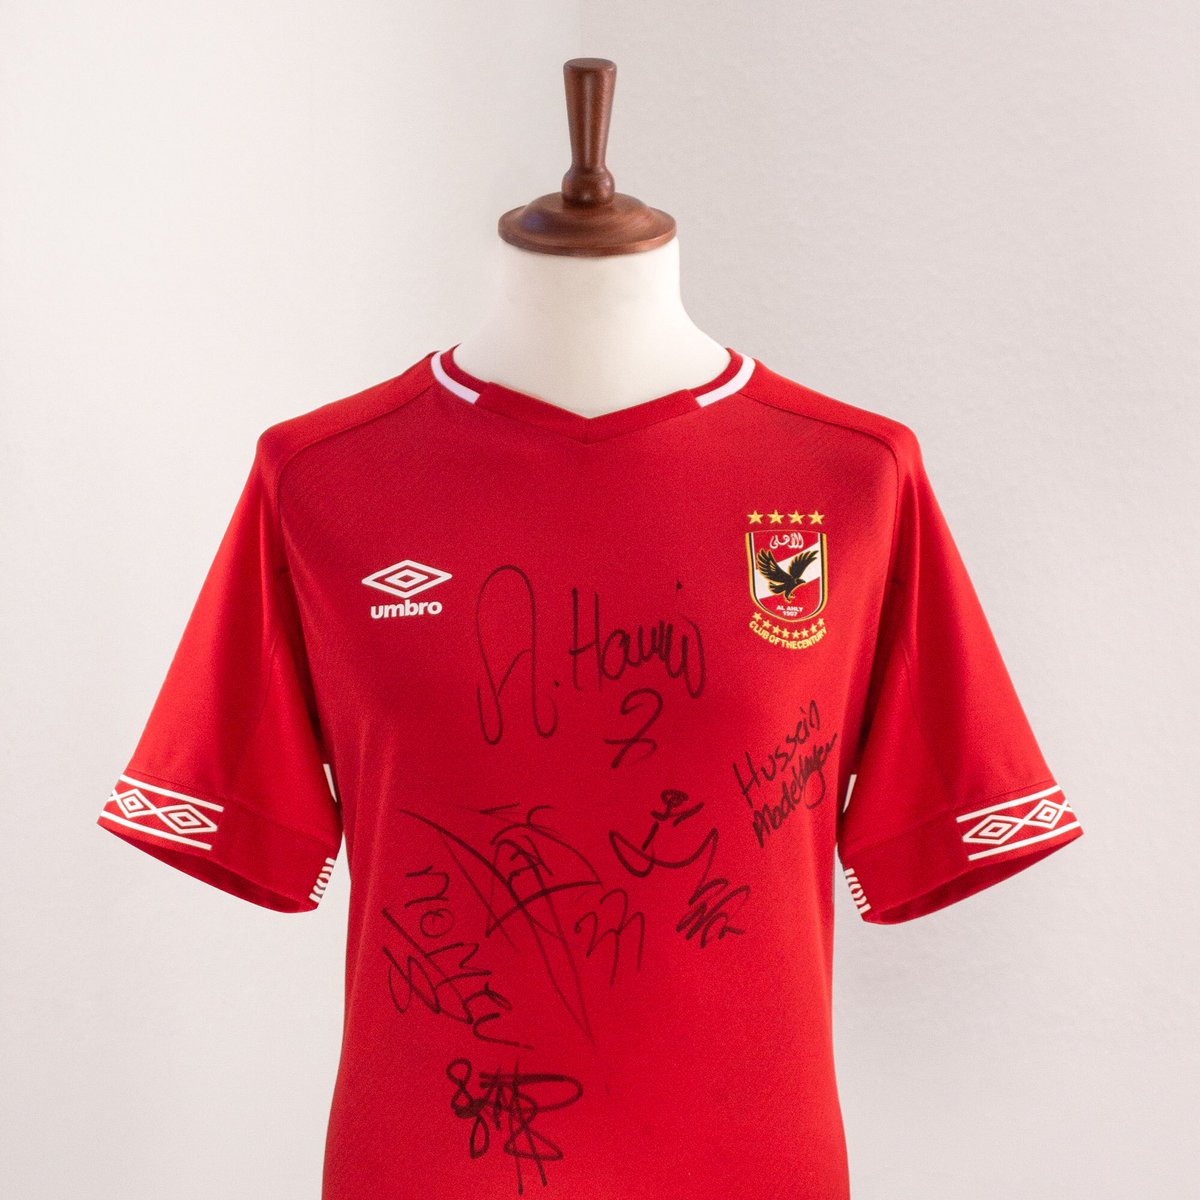 🚨Attention @AlAhly fans🚨

We’re giving away 1 x signed home shirt from the 18/19 season. 

To enter: 
1. Follow @umbro 
2. Like and RT this post
3. Tag a friend 

We’ll choose a winner on Wednesday 22nd May at 12pm UK time. Good luck!! #YallaYaAhly